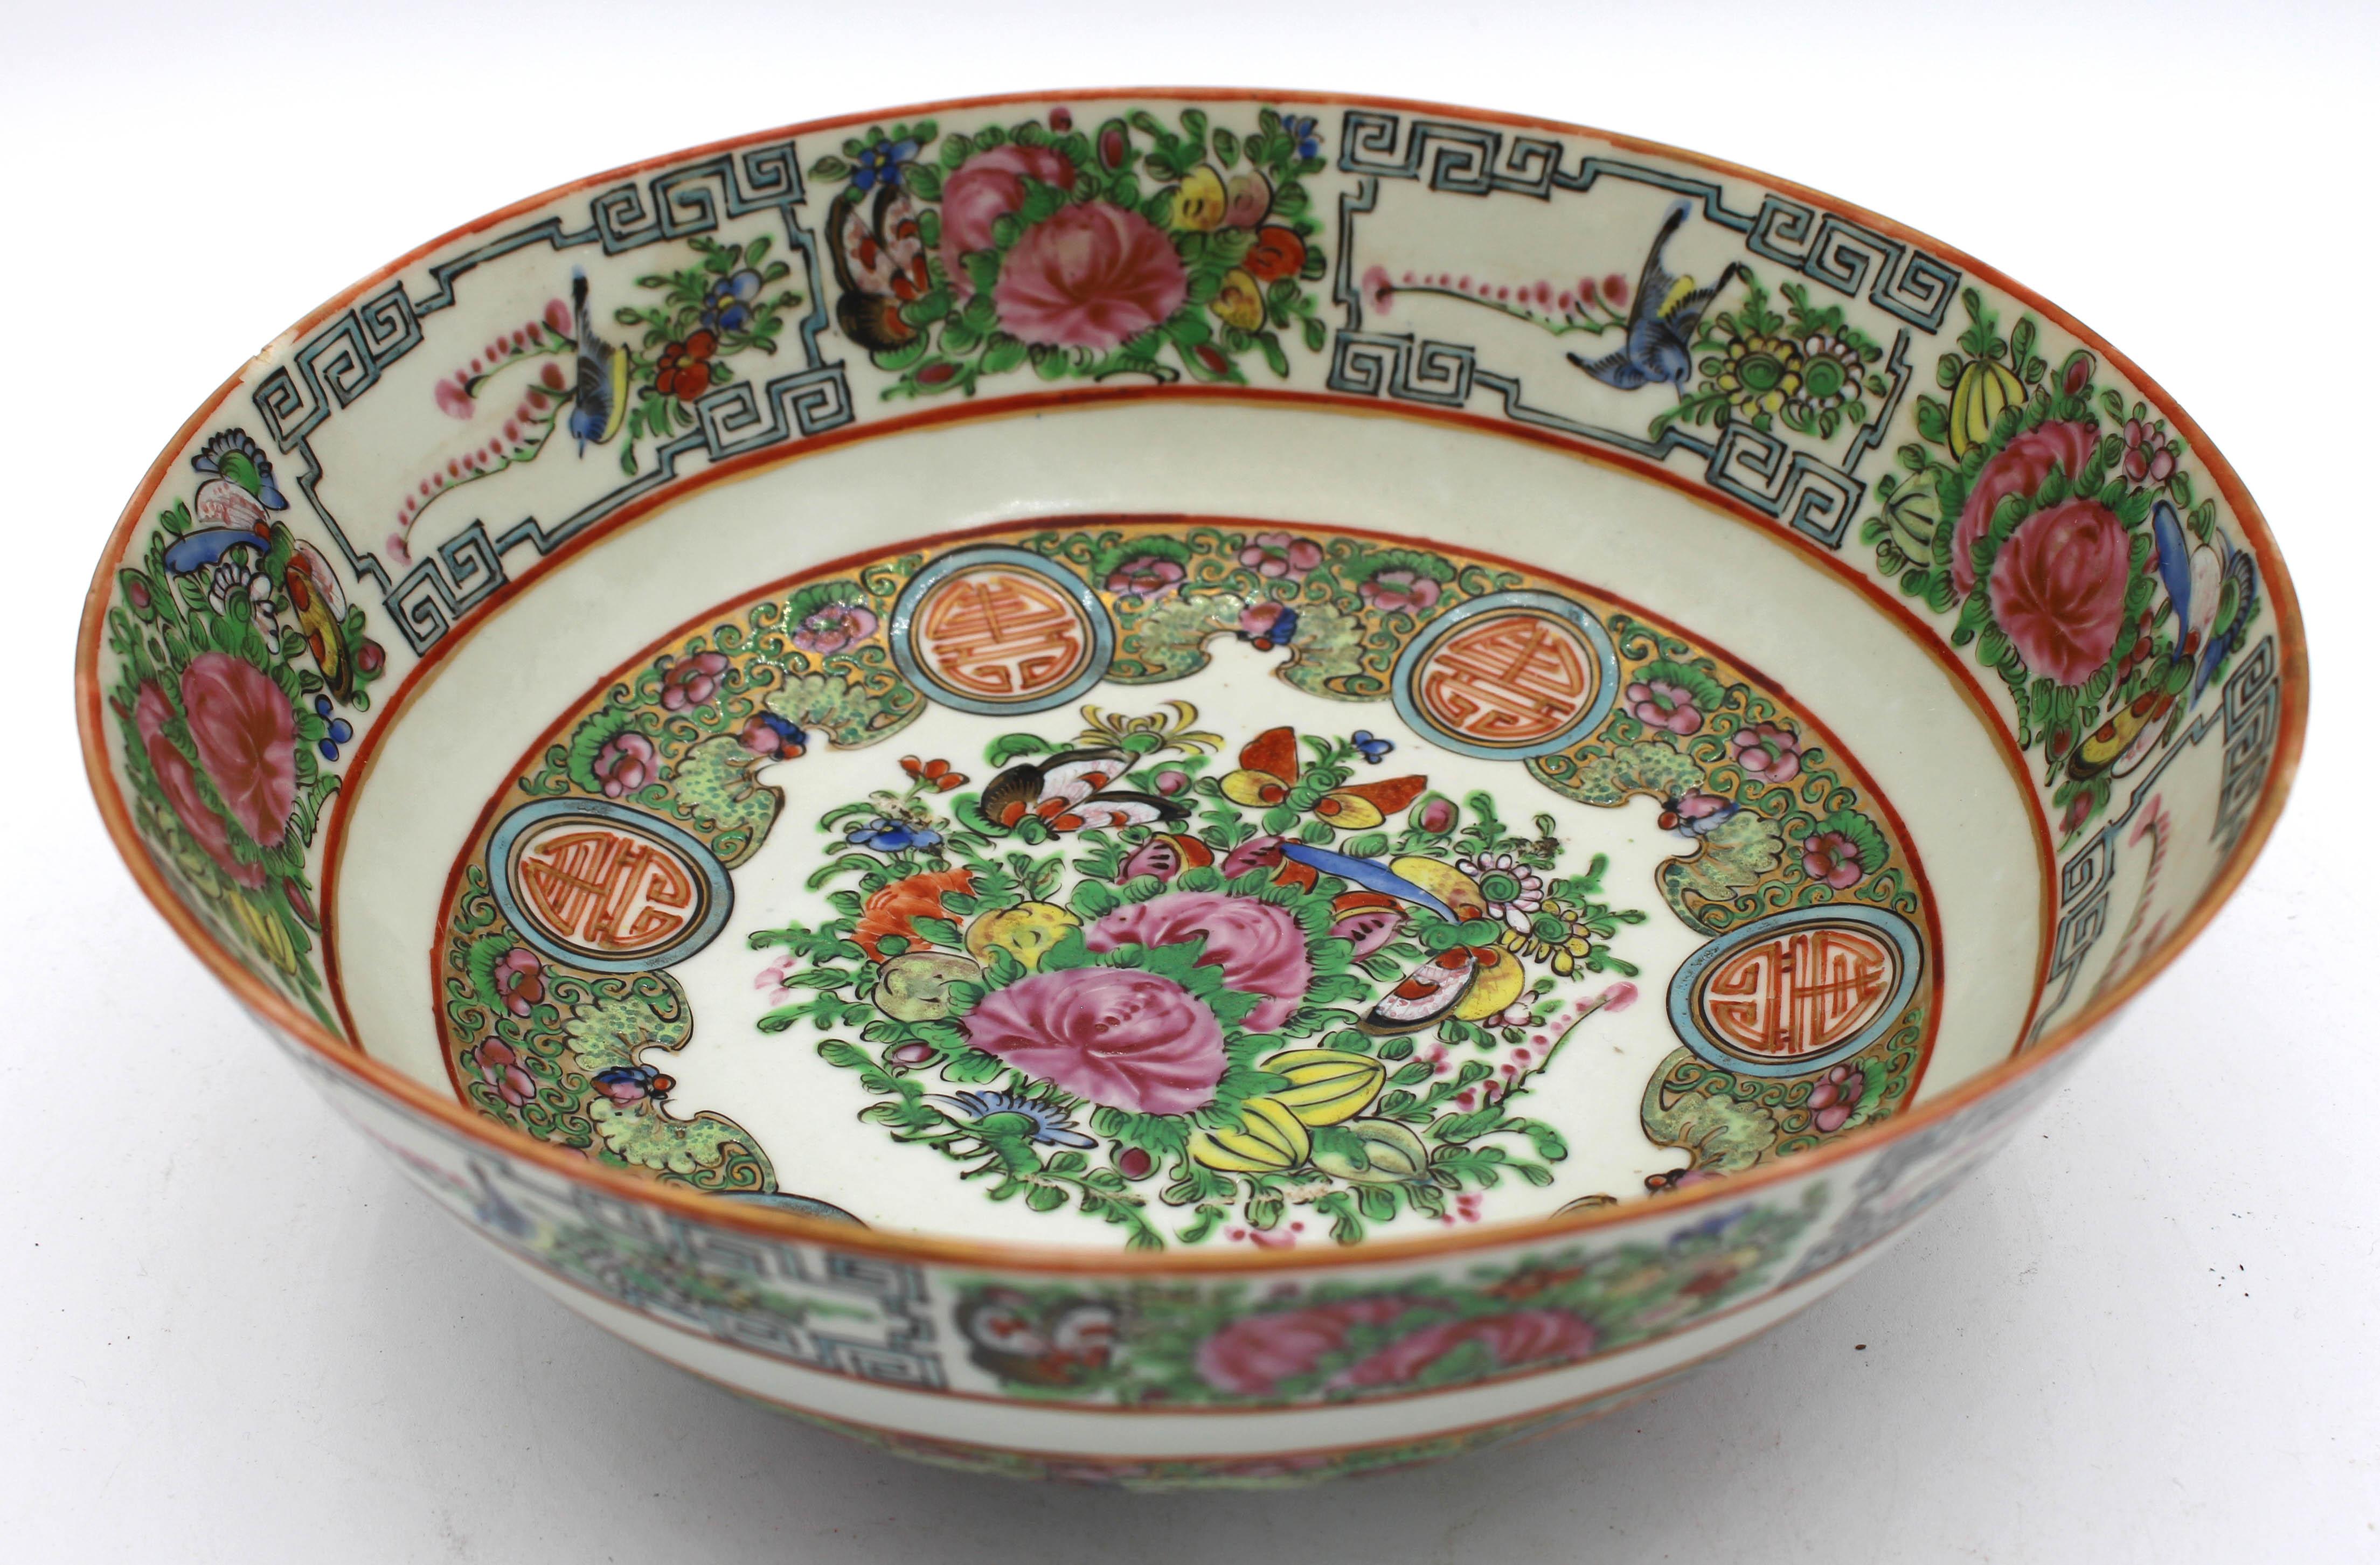 Circa 1920 Chinese export Rose Canton deep bowl. Made in China mark. Late Qing-Republic era. Double happiness symbols, fences defining floral & butterfly reserves. One rim chip.
9